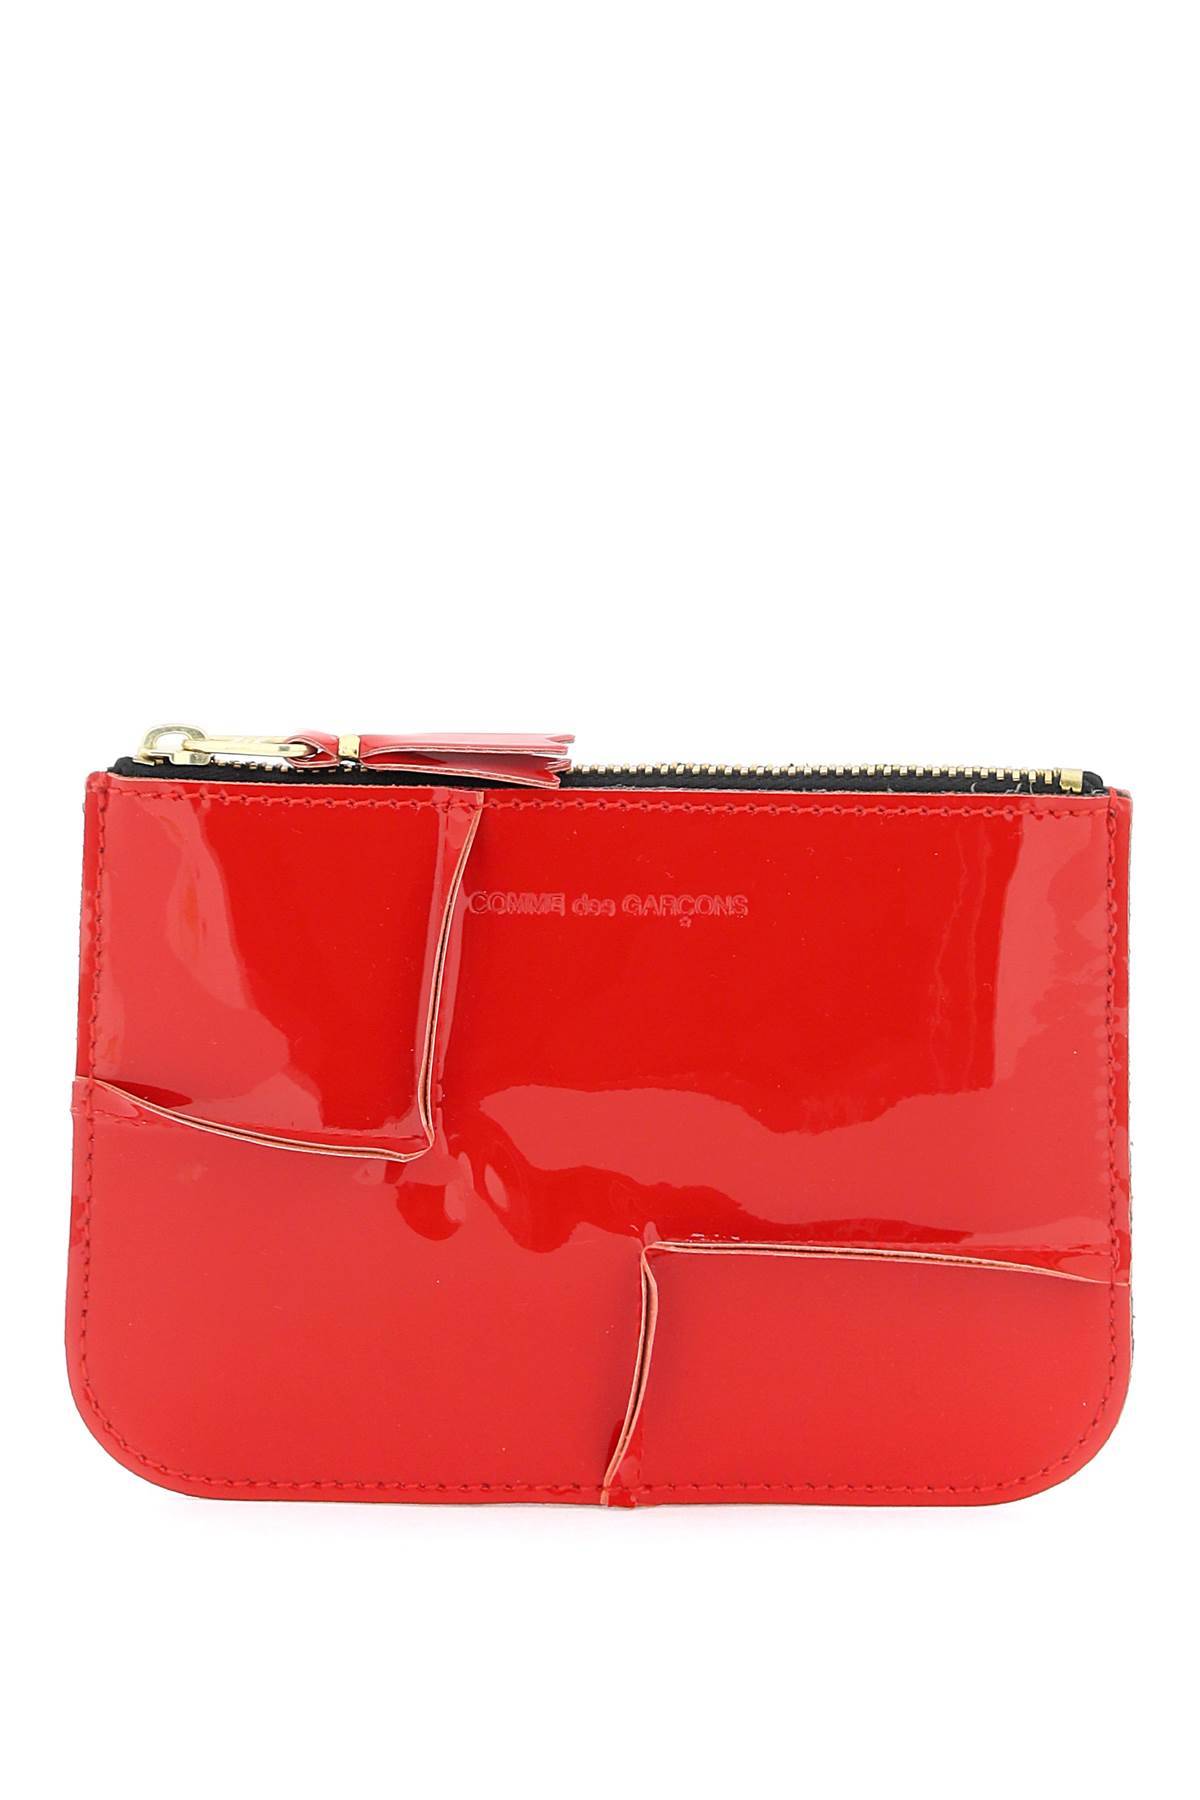 COMME DES GARCONS WALLET COMME DES GARCONS WALLET zip around patent leather wallet with zipper